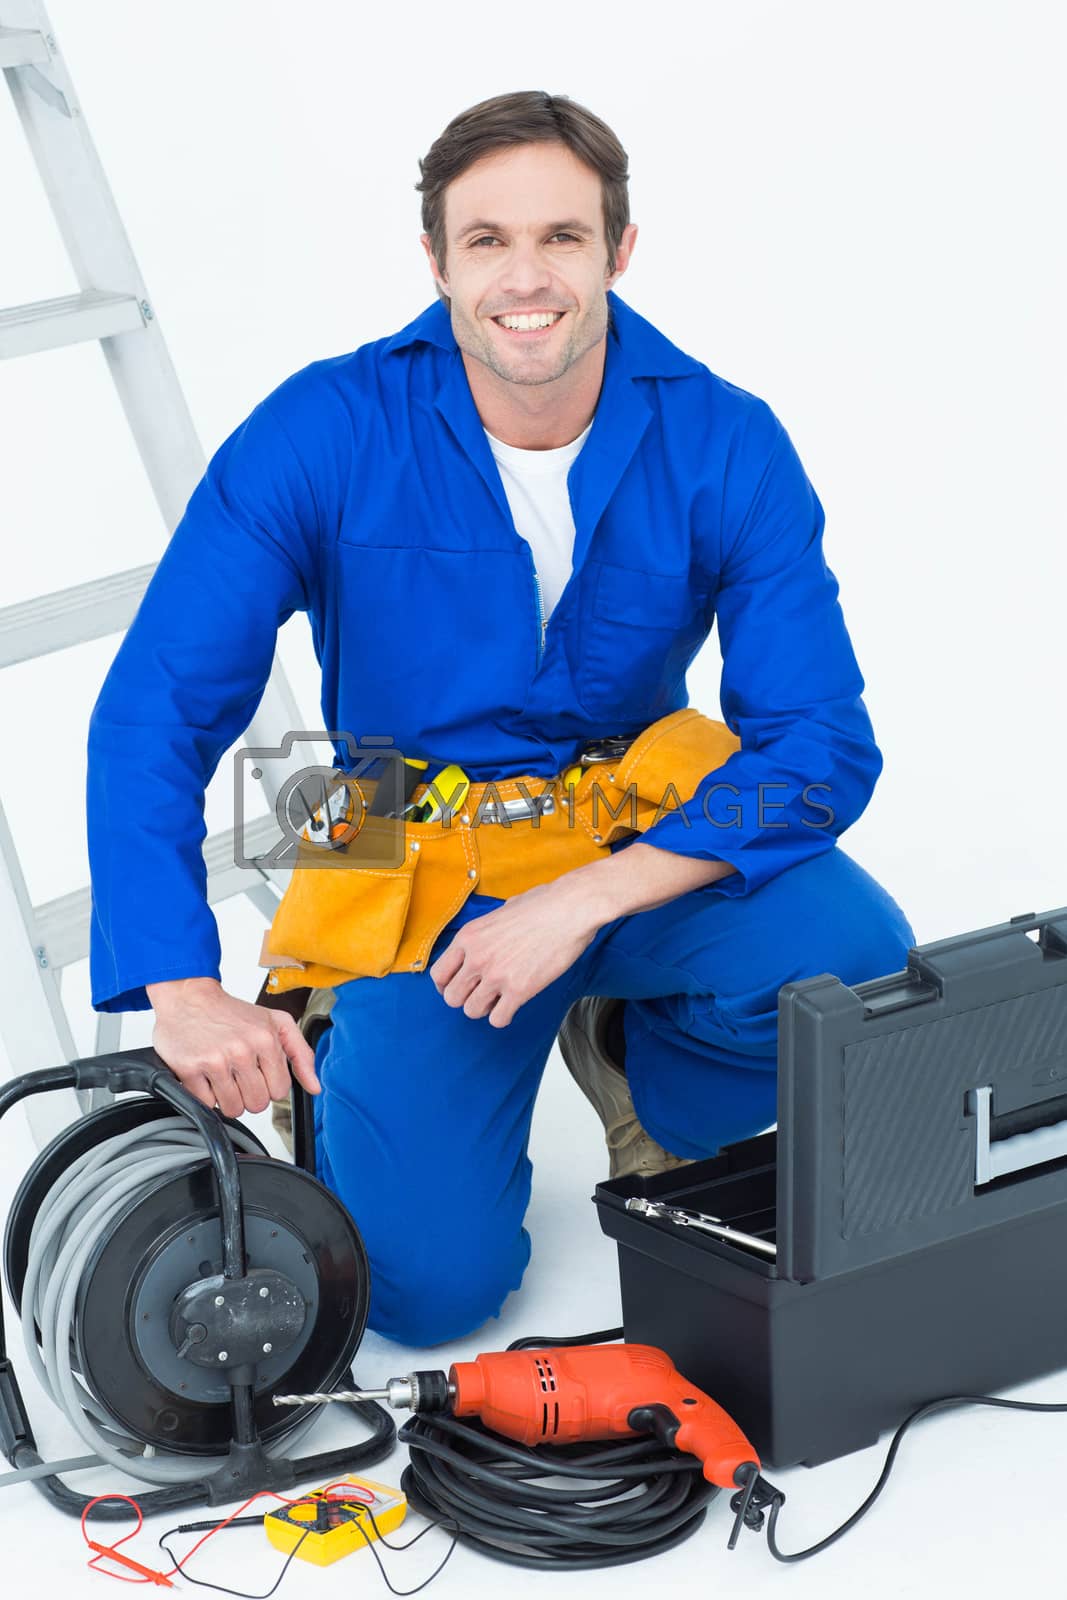 Royalty free image of Confident electrician with tools by Wavebreakmedia